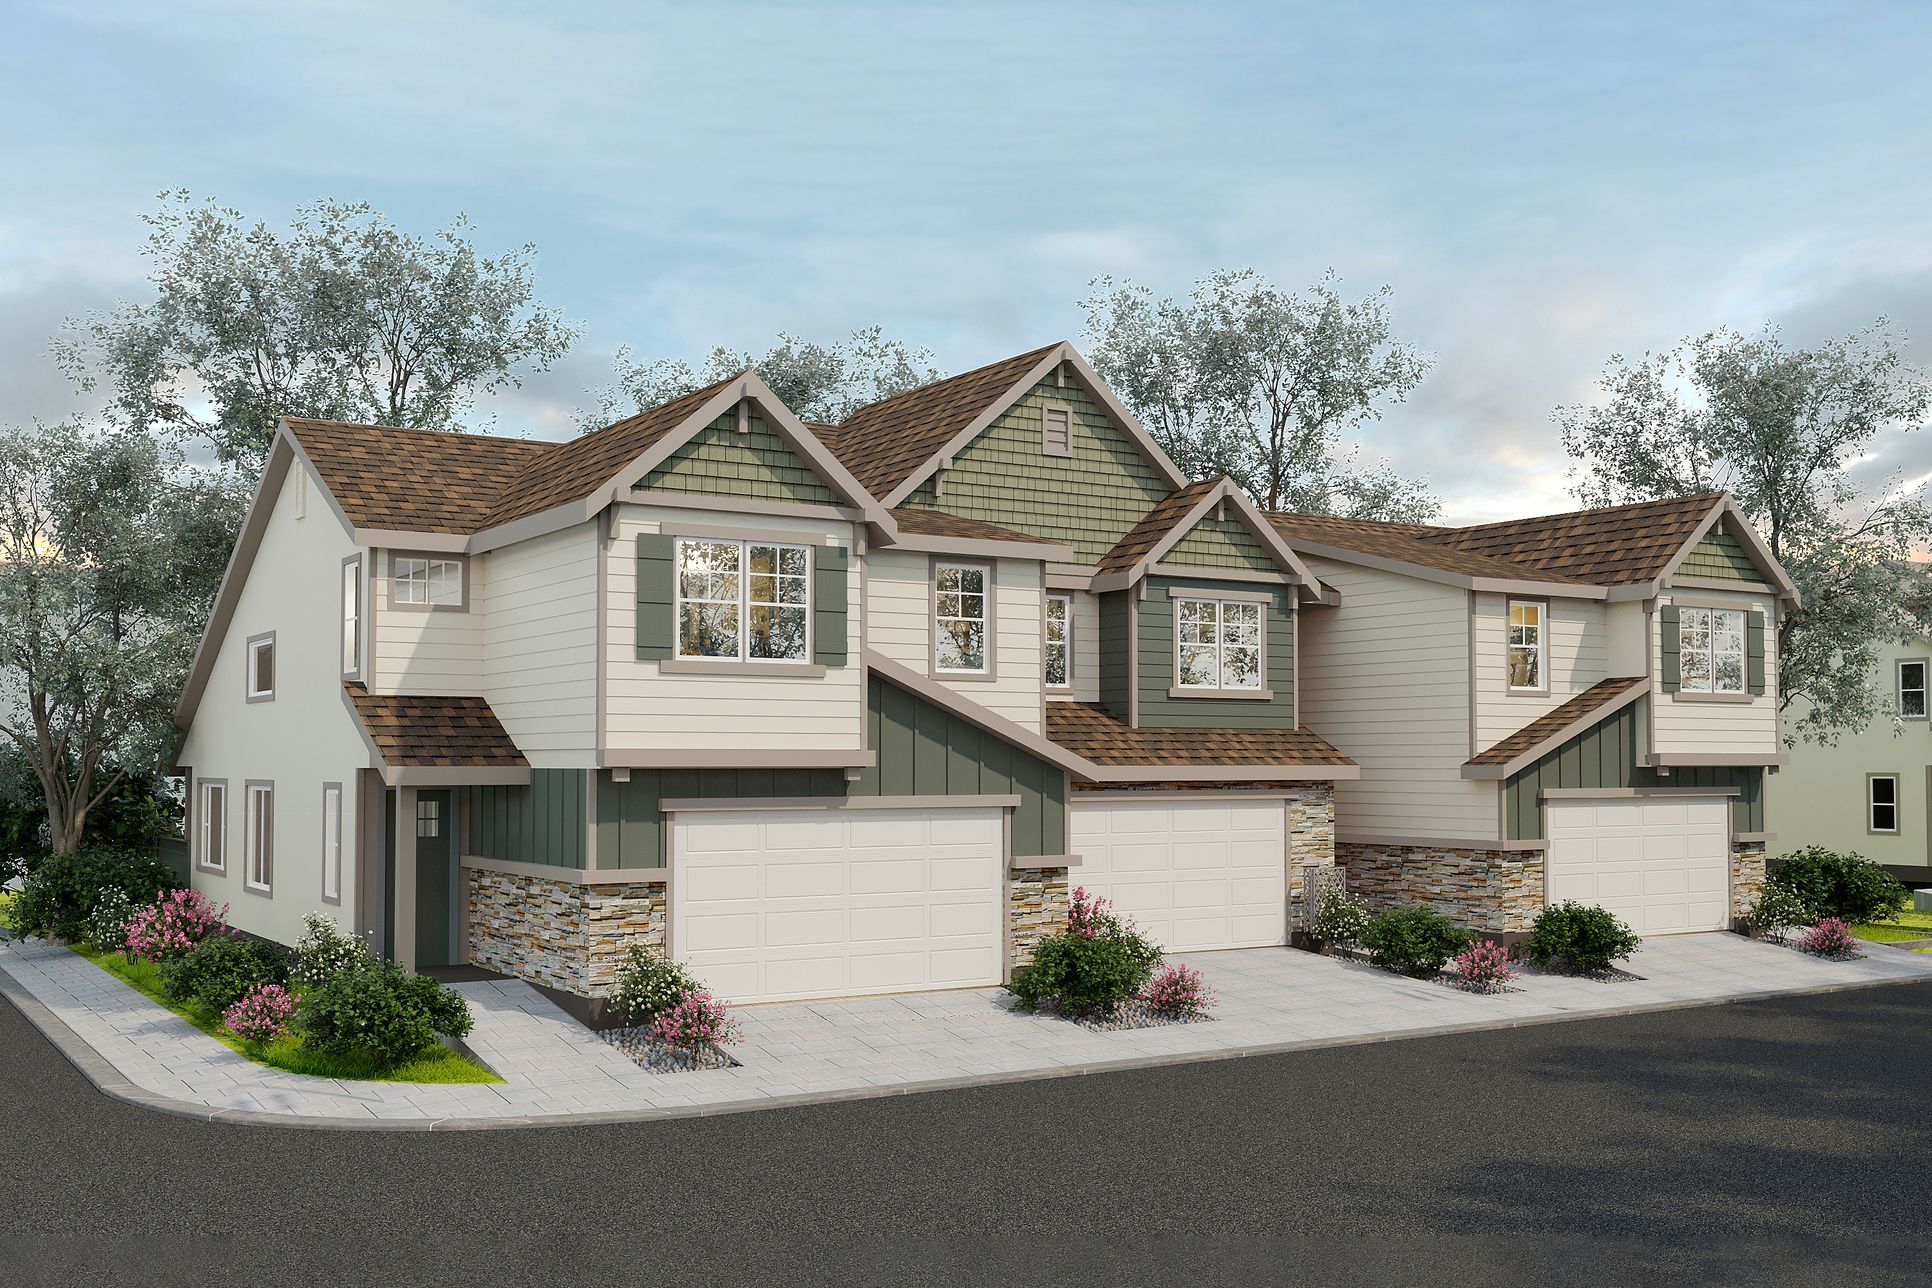 THe Downs at Monte Vista:Luxury Townhomes in Minden NV